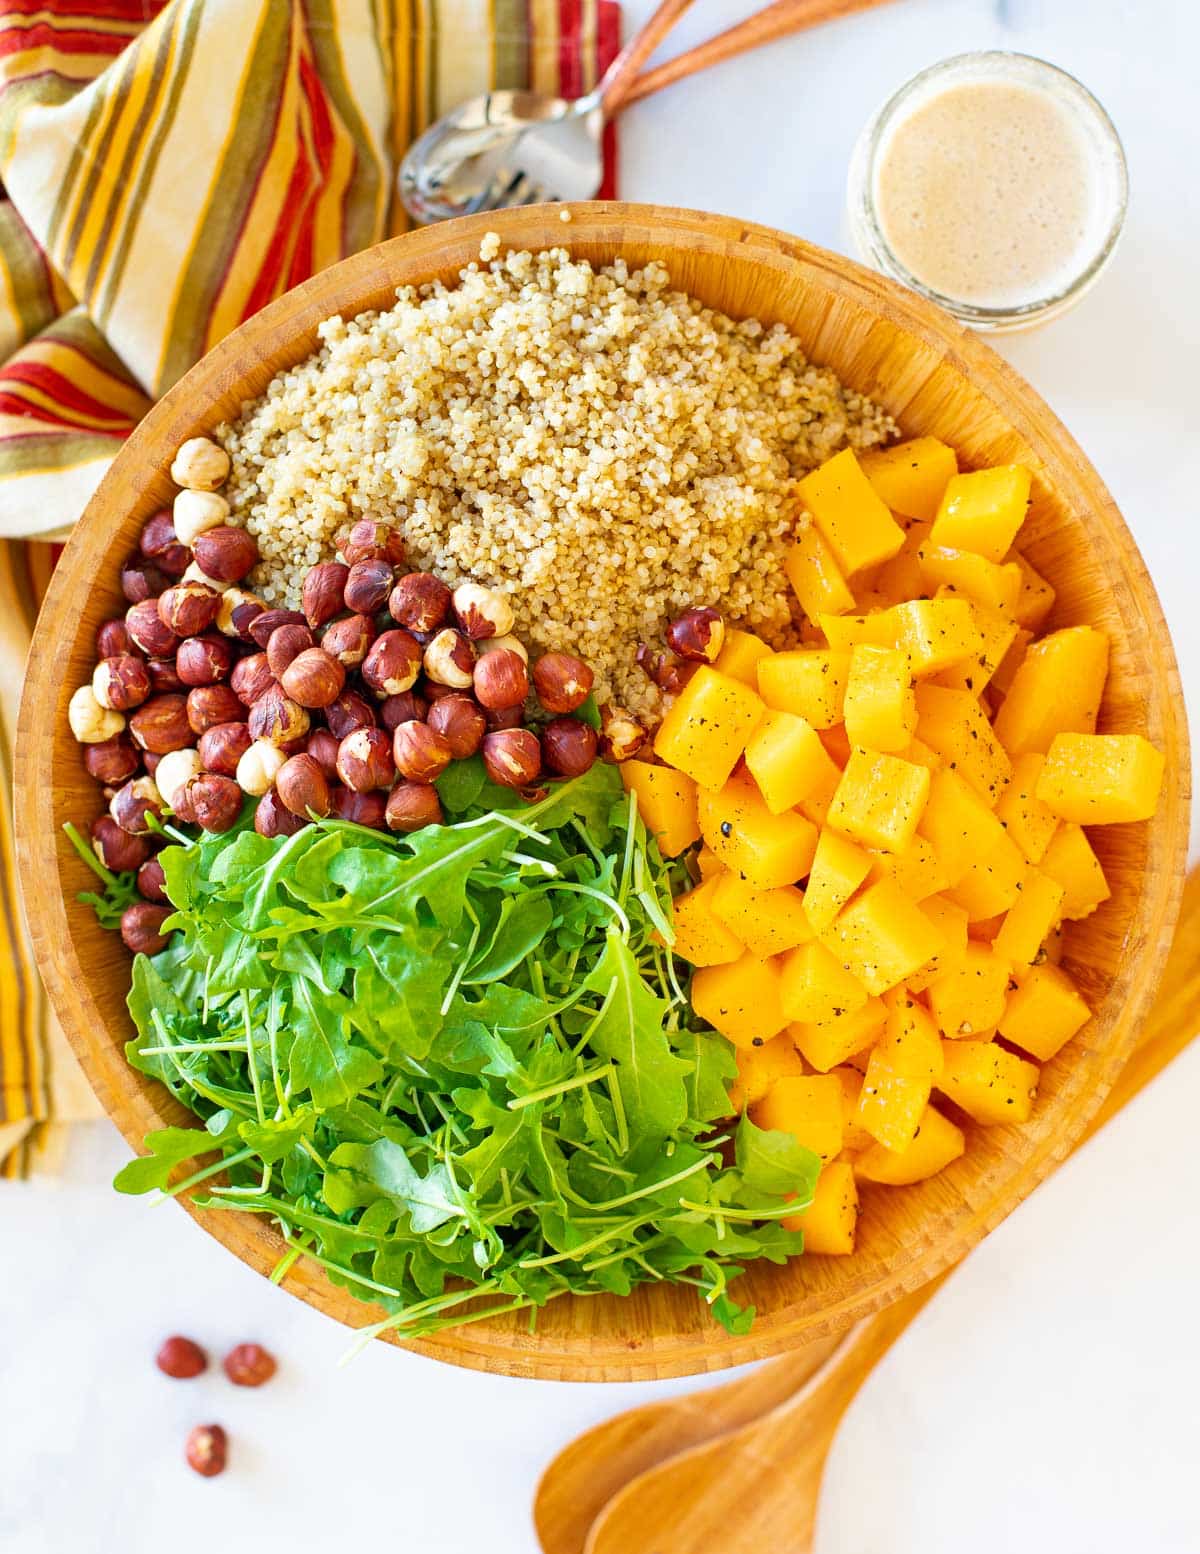 all of the salad components in a wooden bowl